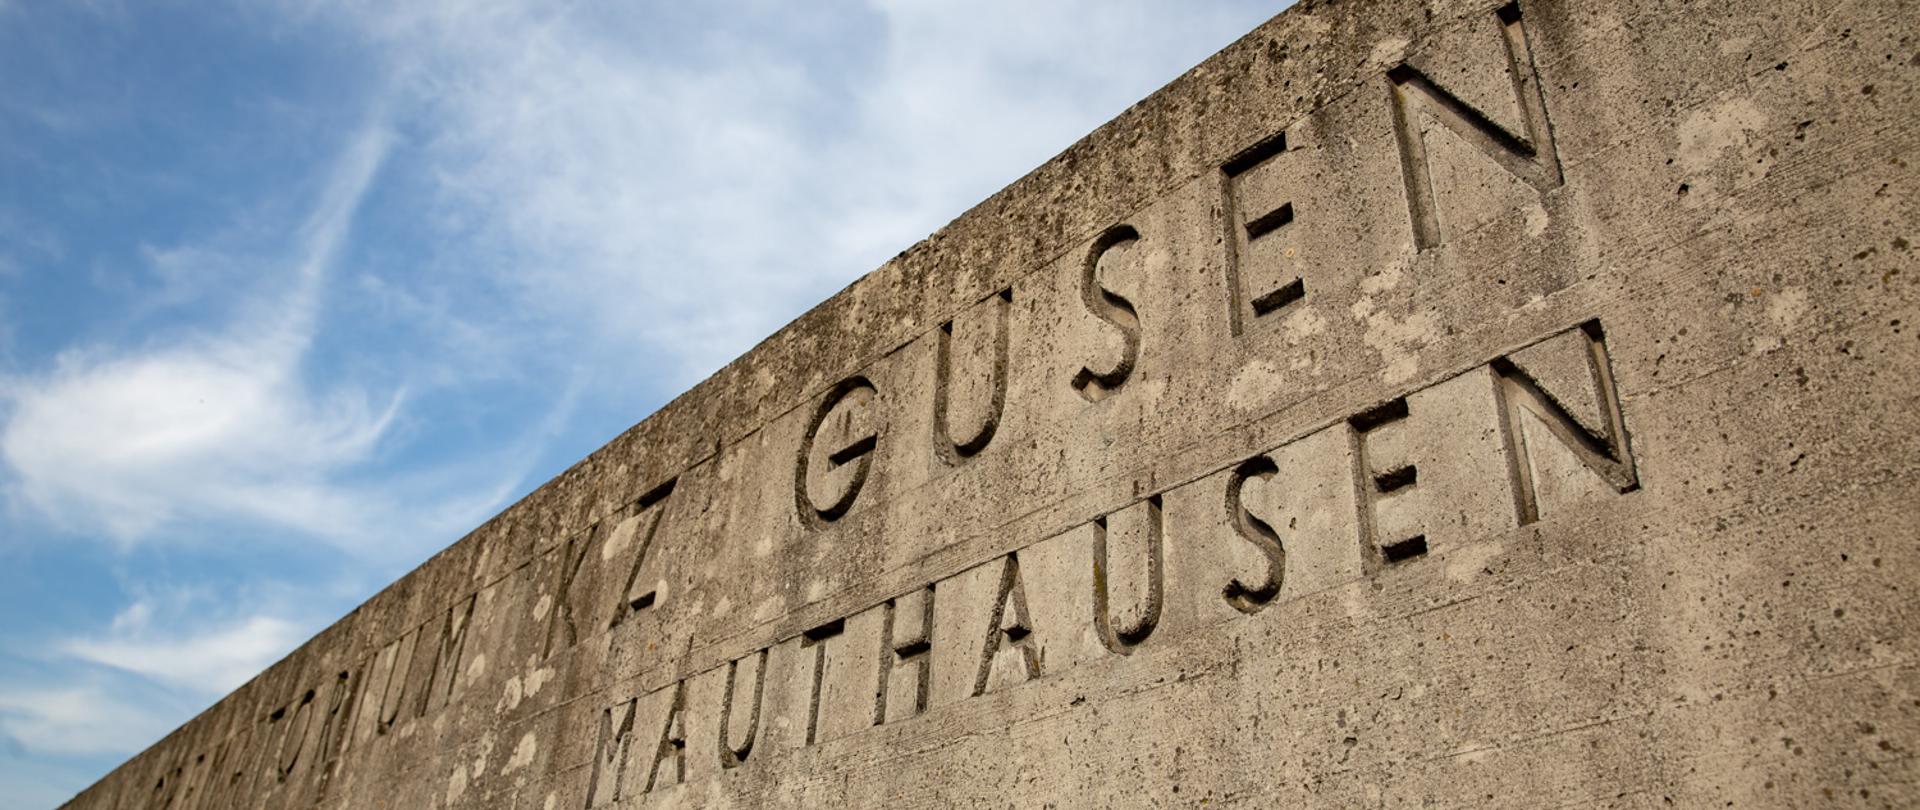 On 5 May 1945, at 5 p.m., American troops crossed the gates of the German concentration camp Gusen. The main Mauthausen camp was liberated the same day, while the remaining satellite camps of the Mauthausen-Gusen camp system were freed in late April and early May.